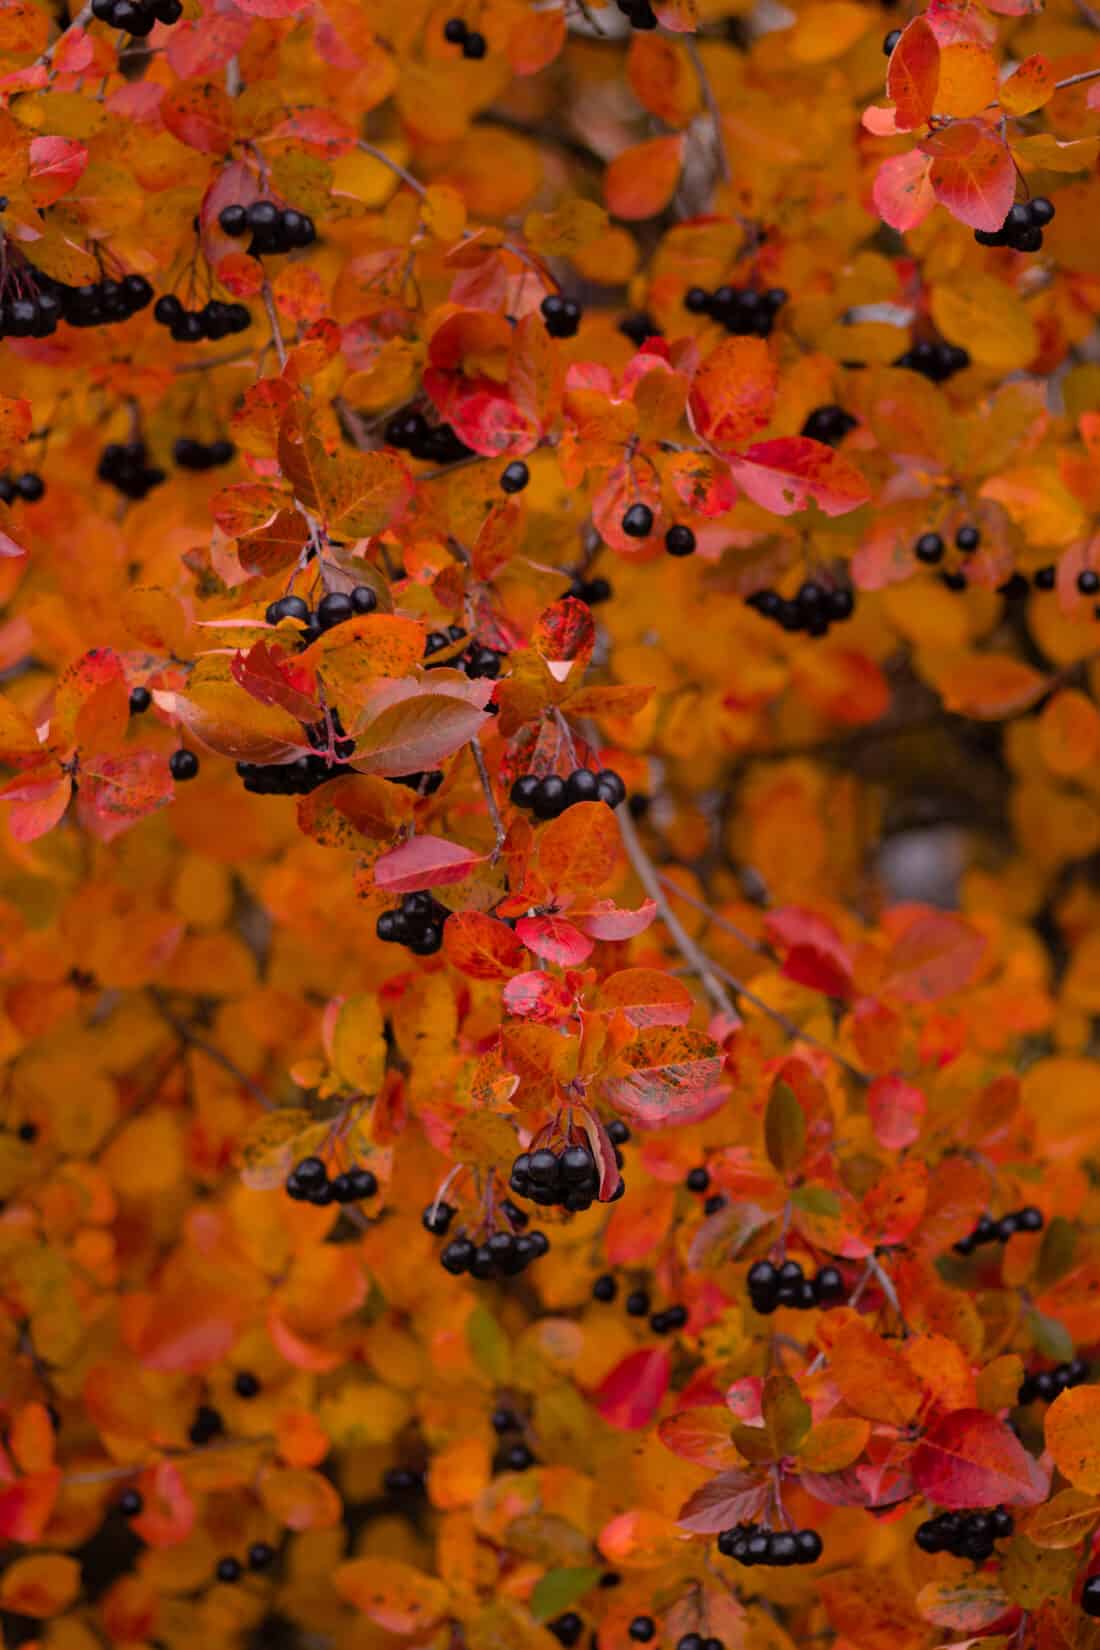 A tree with red leaves and black berries.